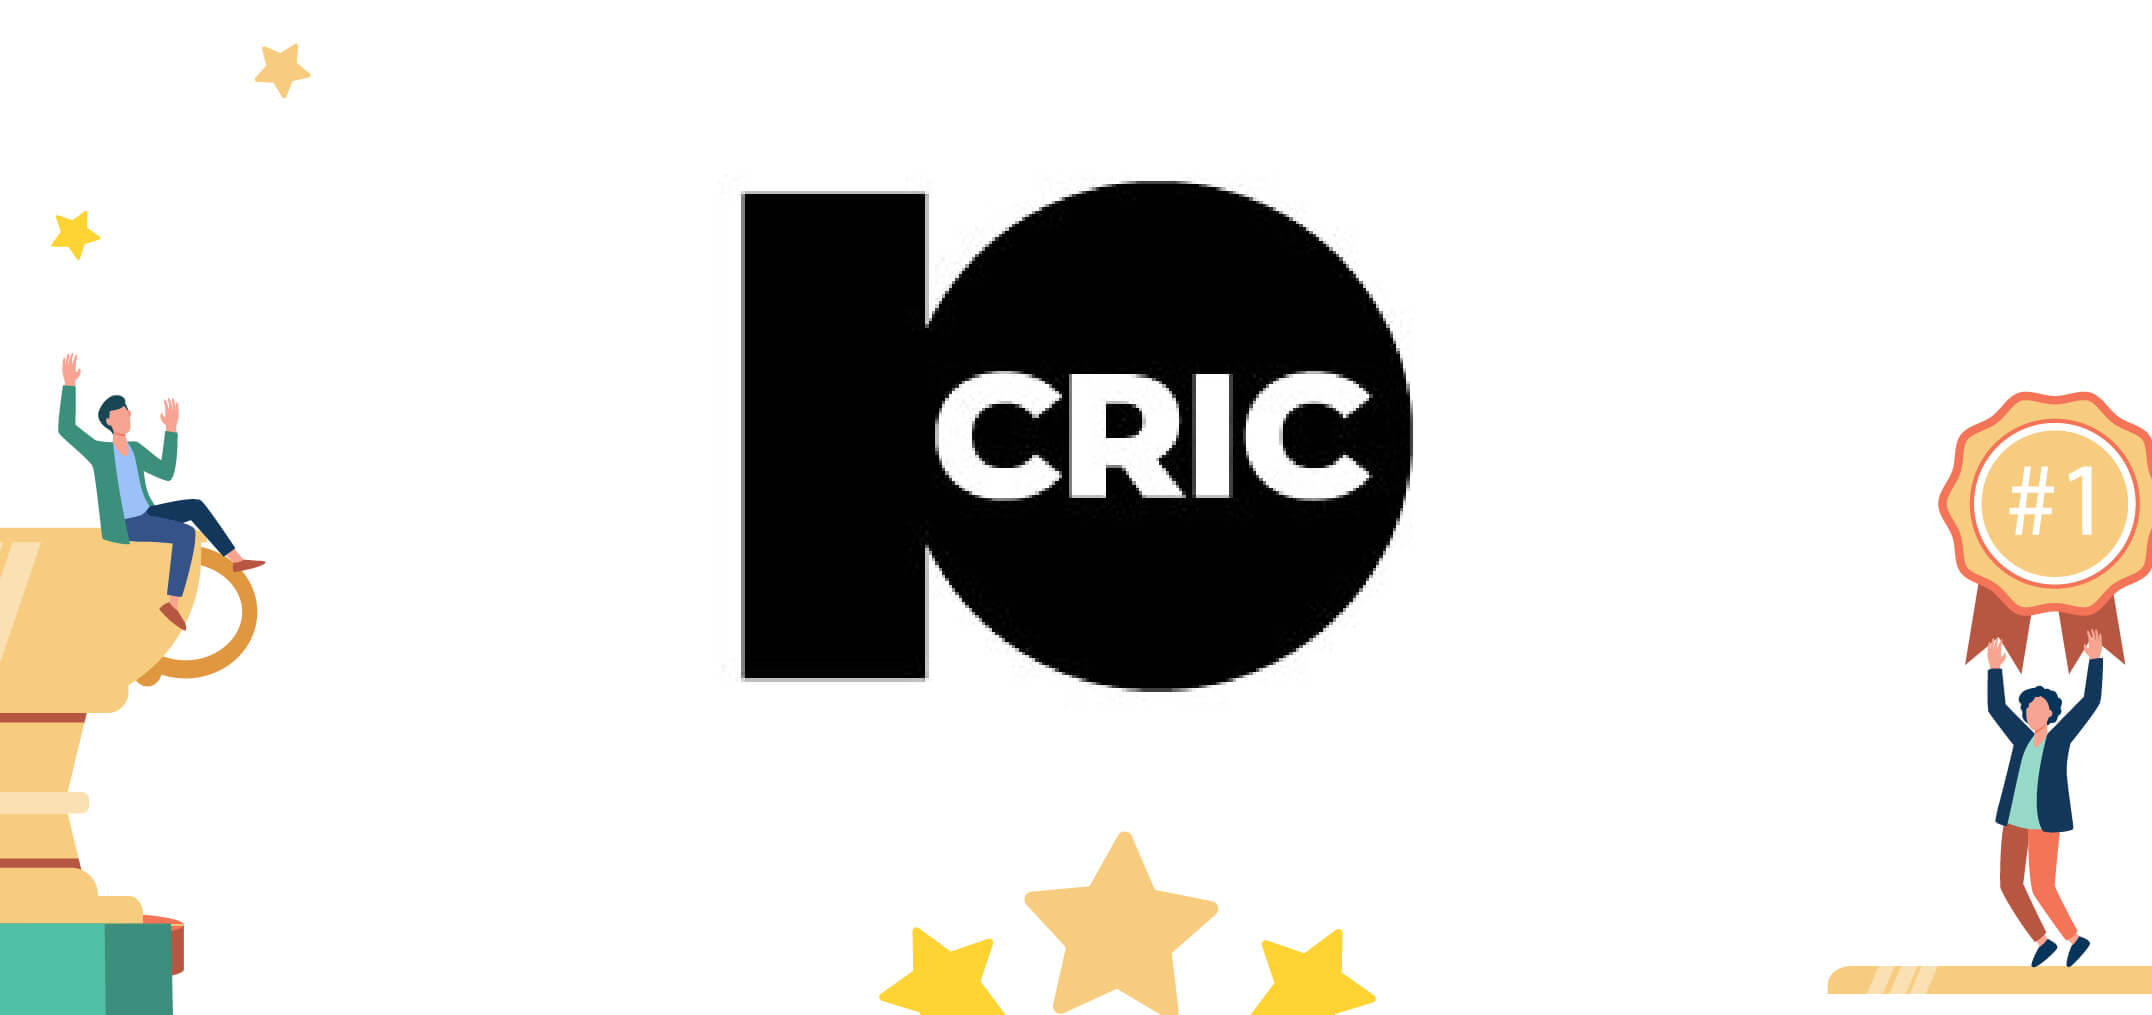 What is 10cric known for?